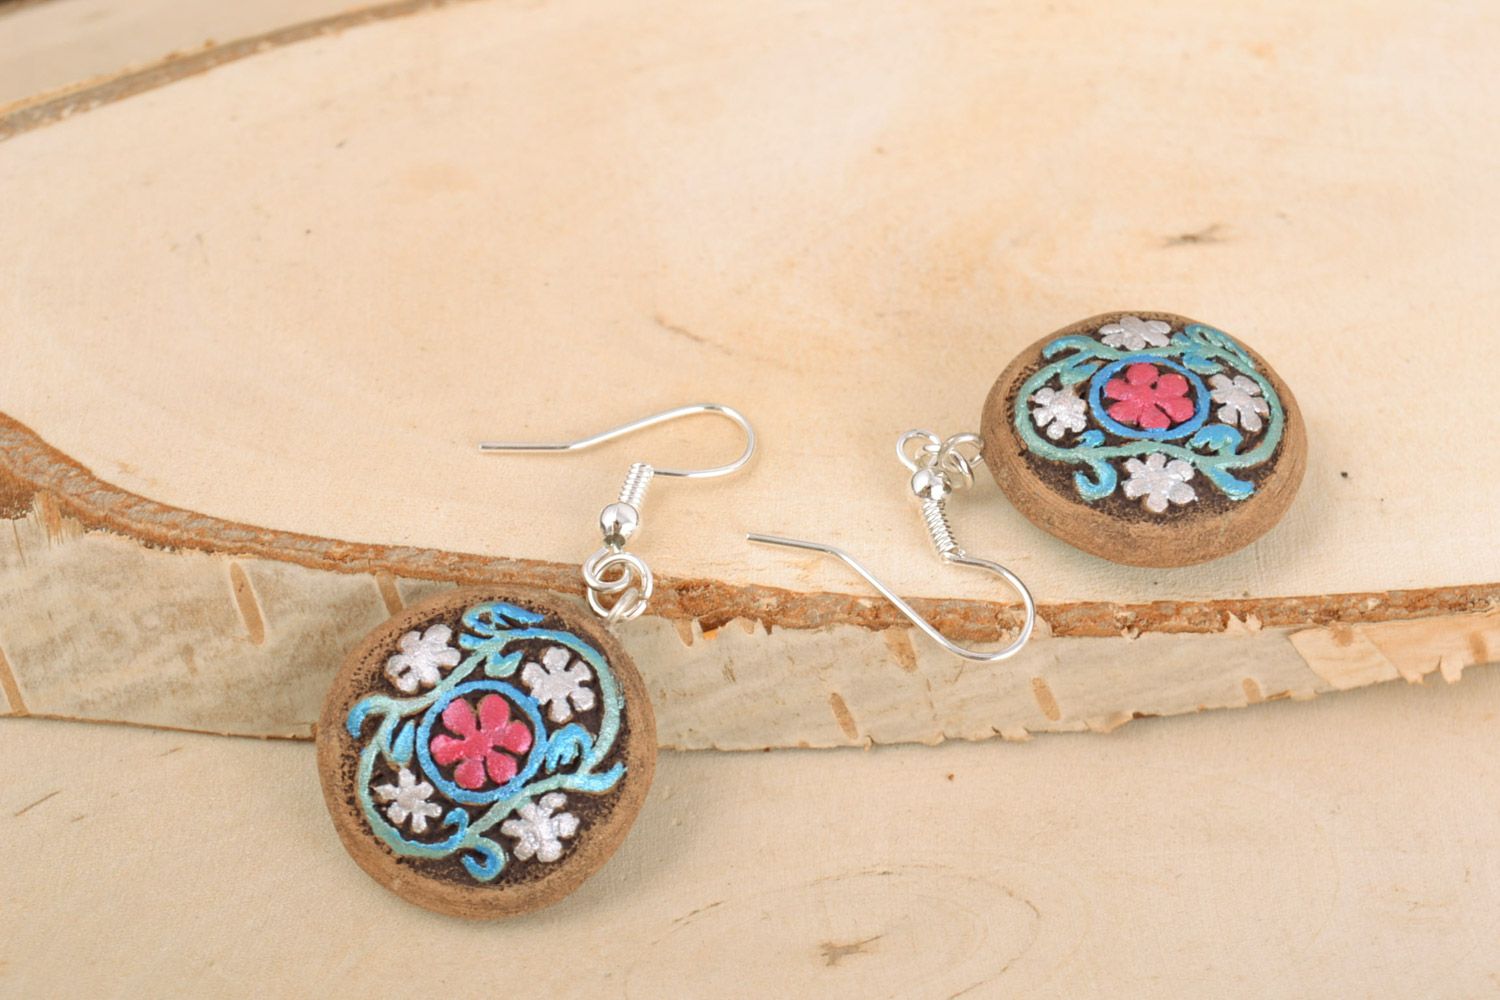 Small handmade clay round earrings painted with acrylics photo 1